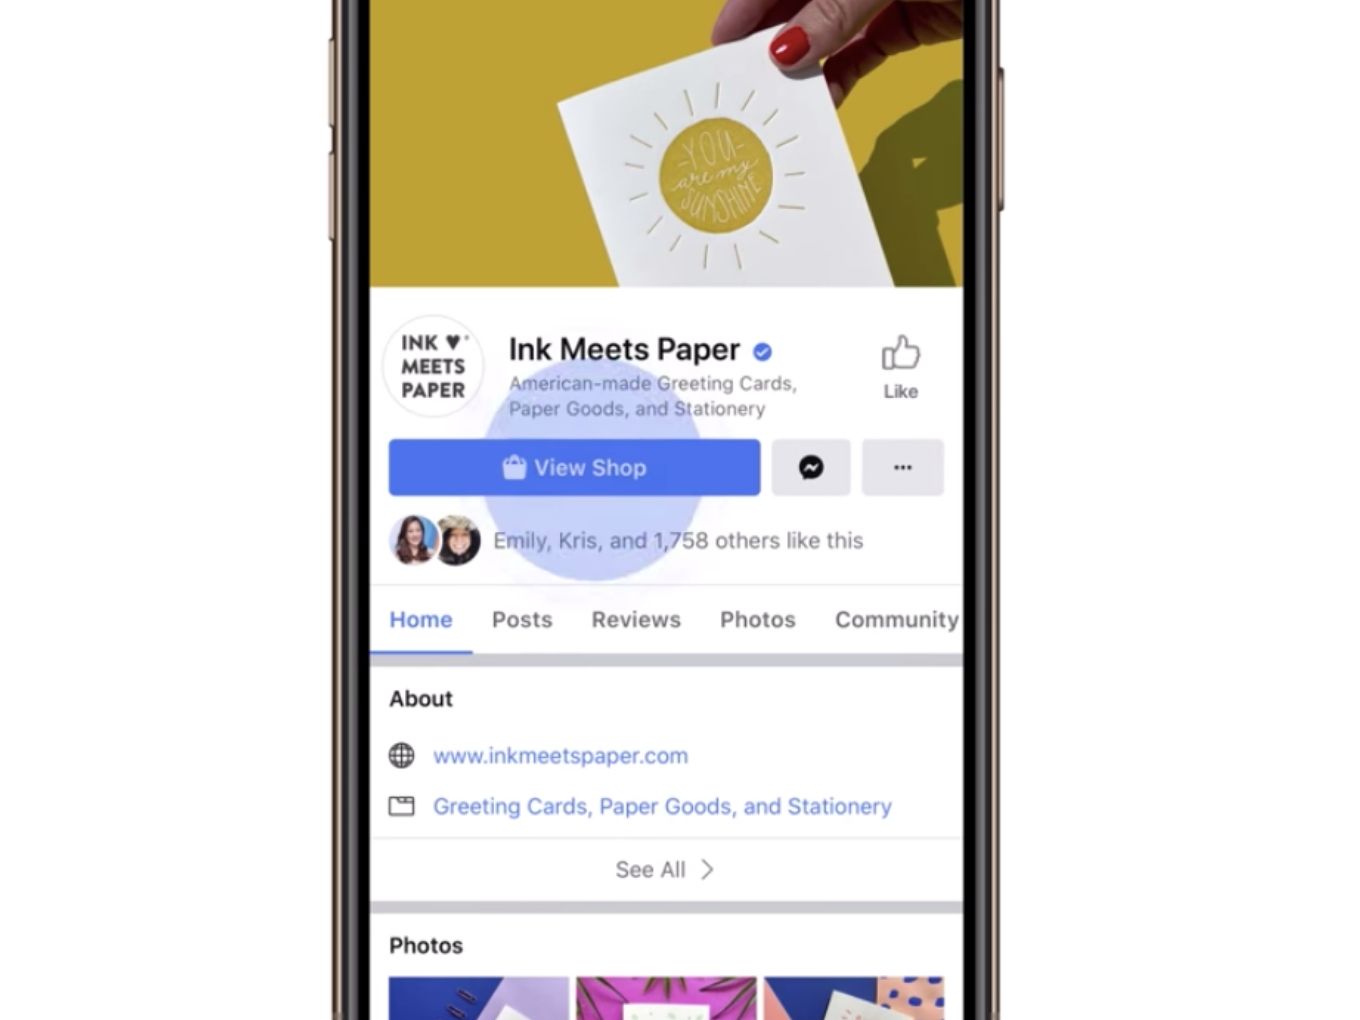 Facebook Takes A Step Closer To Ecommerce With ‘Shops’ Launch